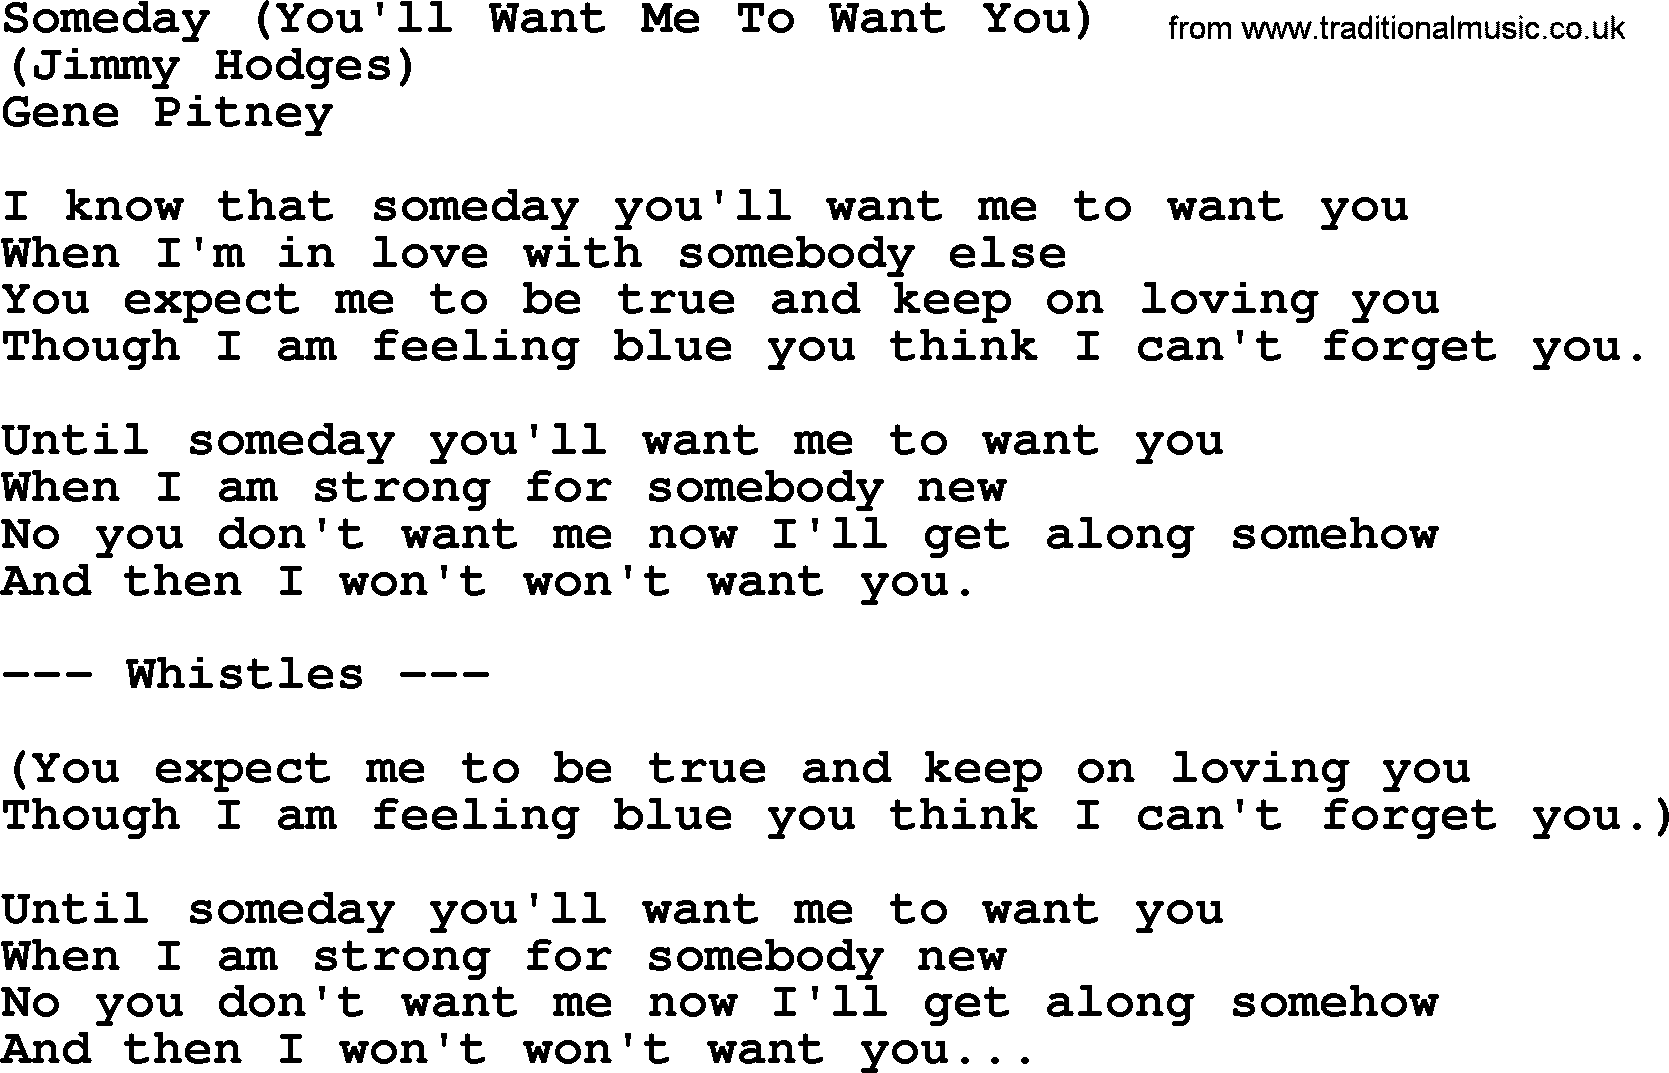 George Jones song: Someday (you'll Want Me To Want You), lyrics